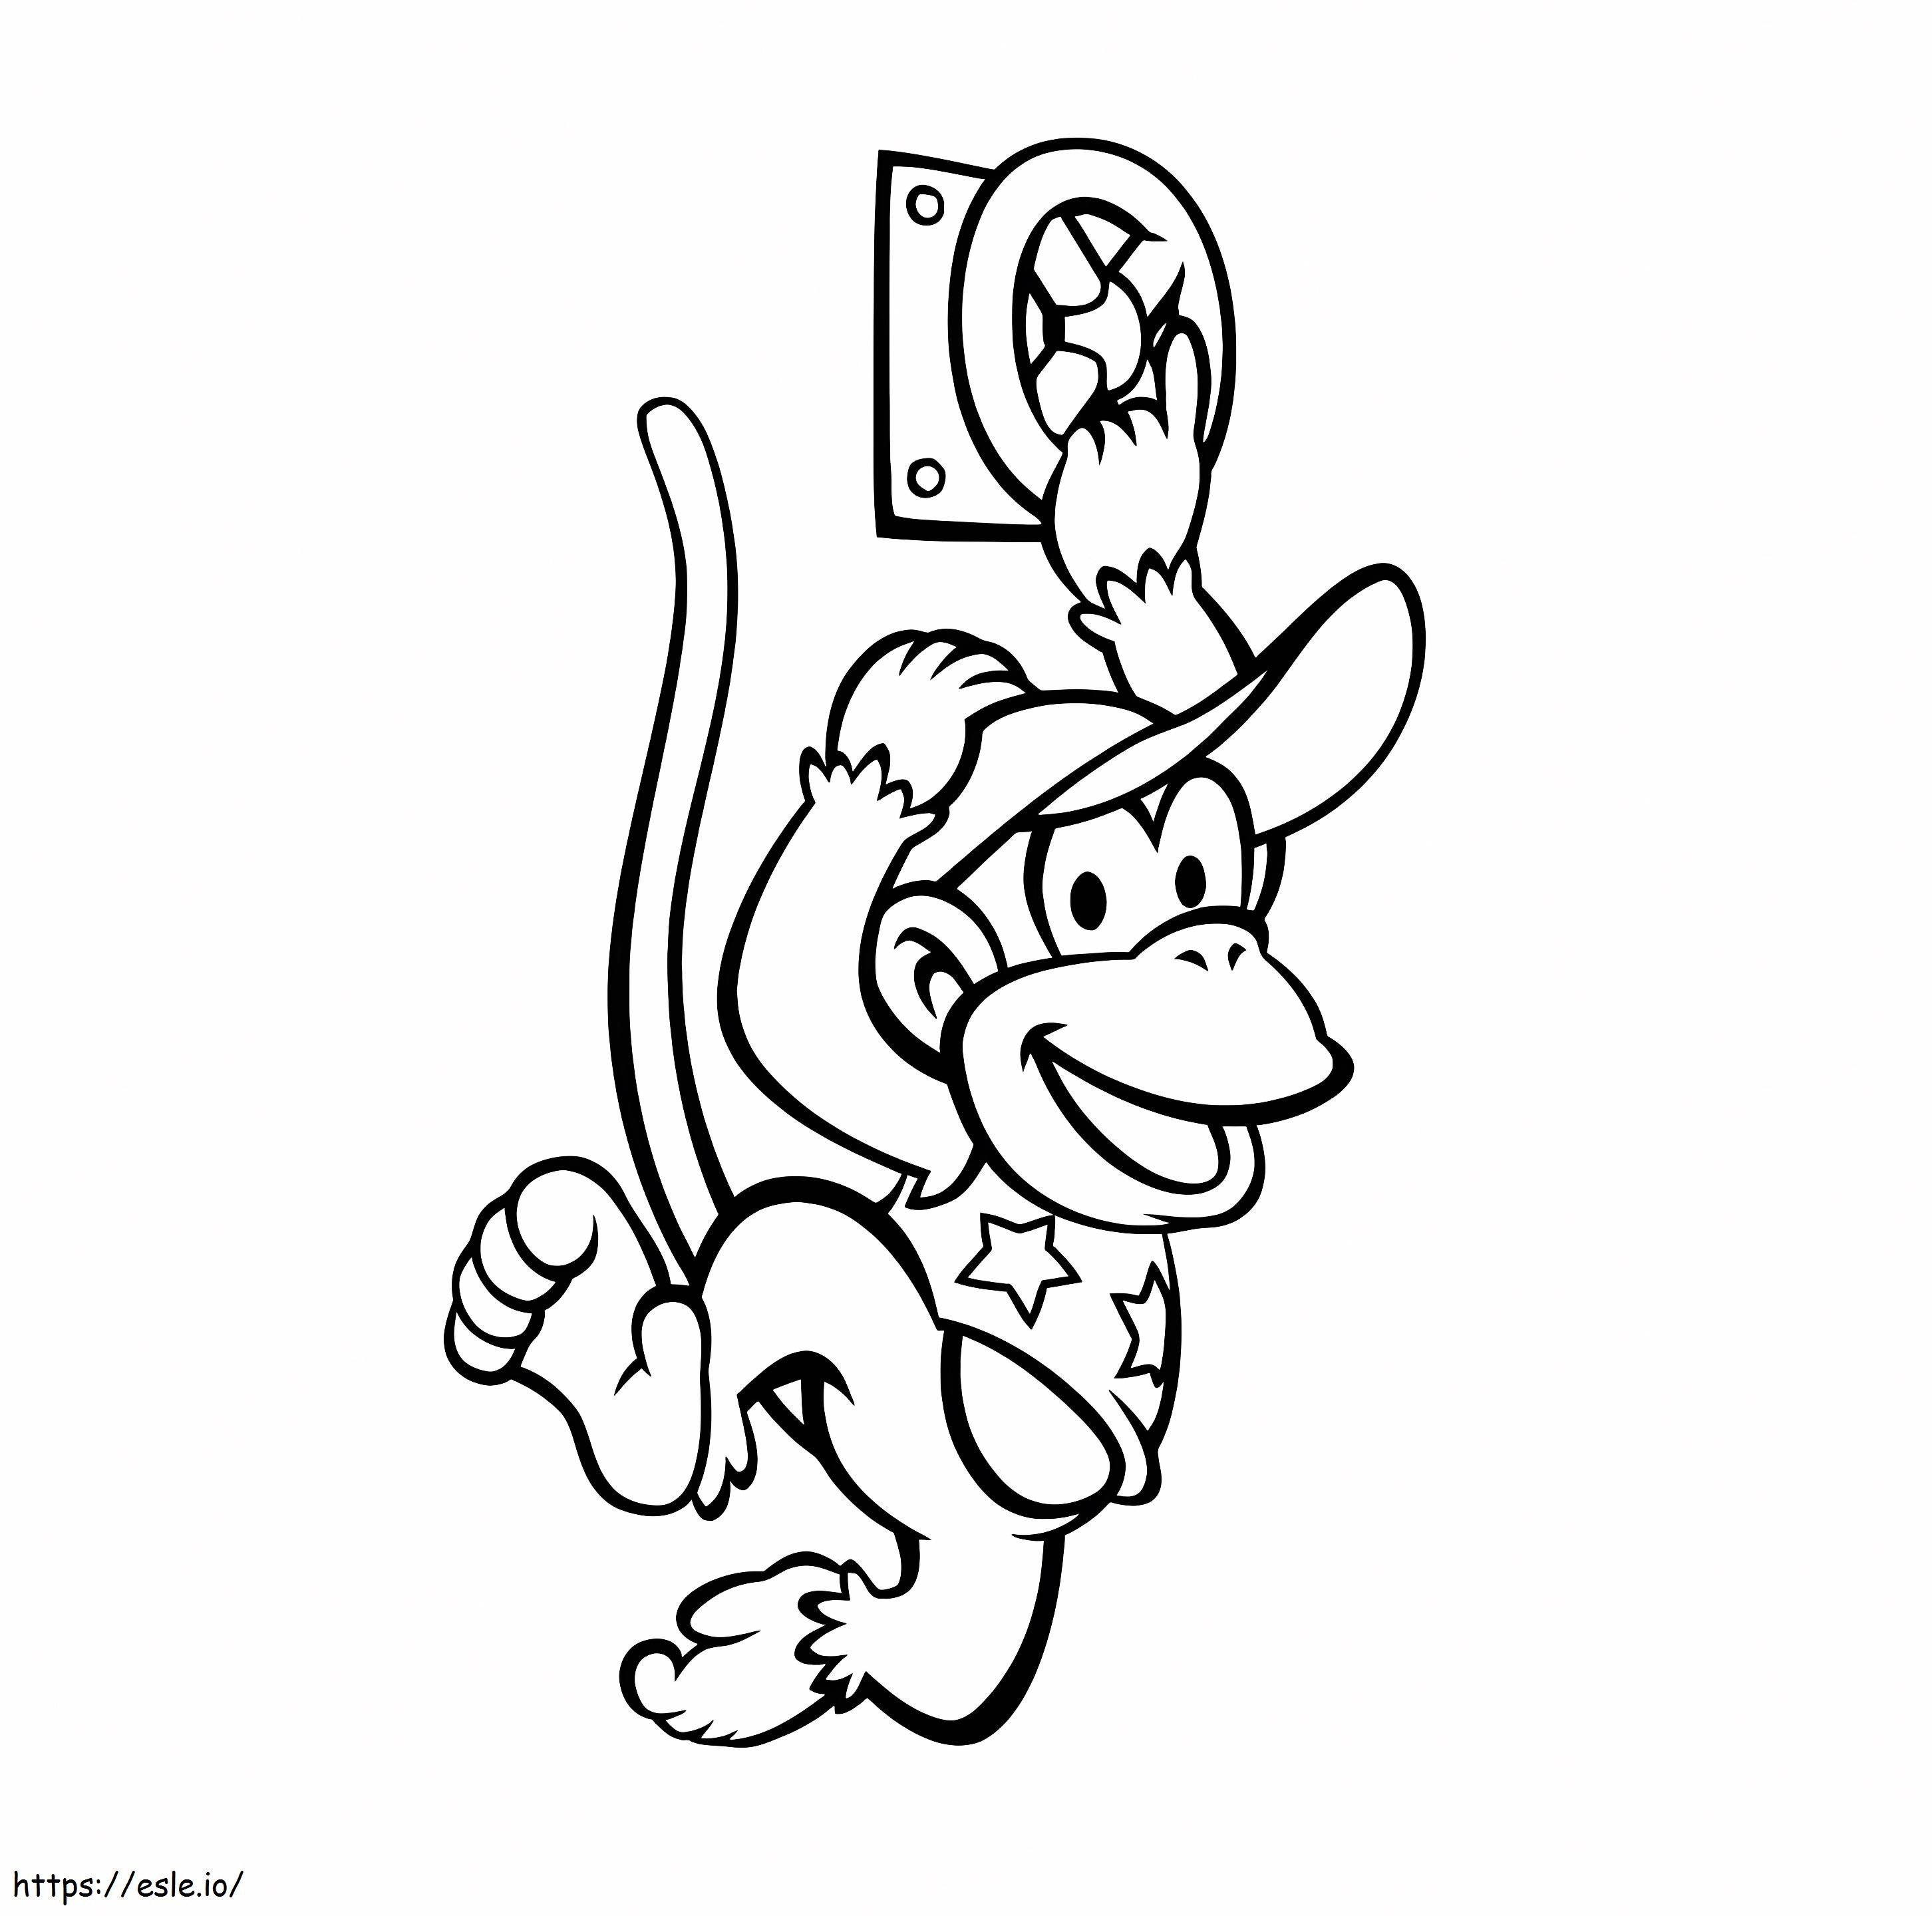 Diddy Kong Play coloring page